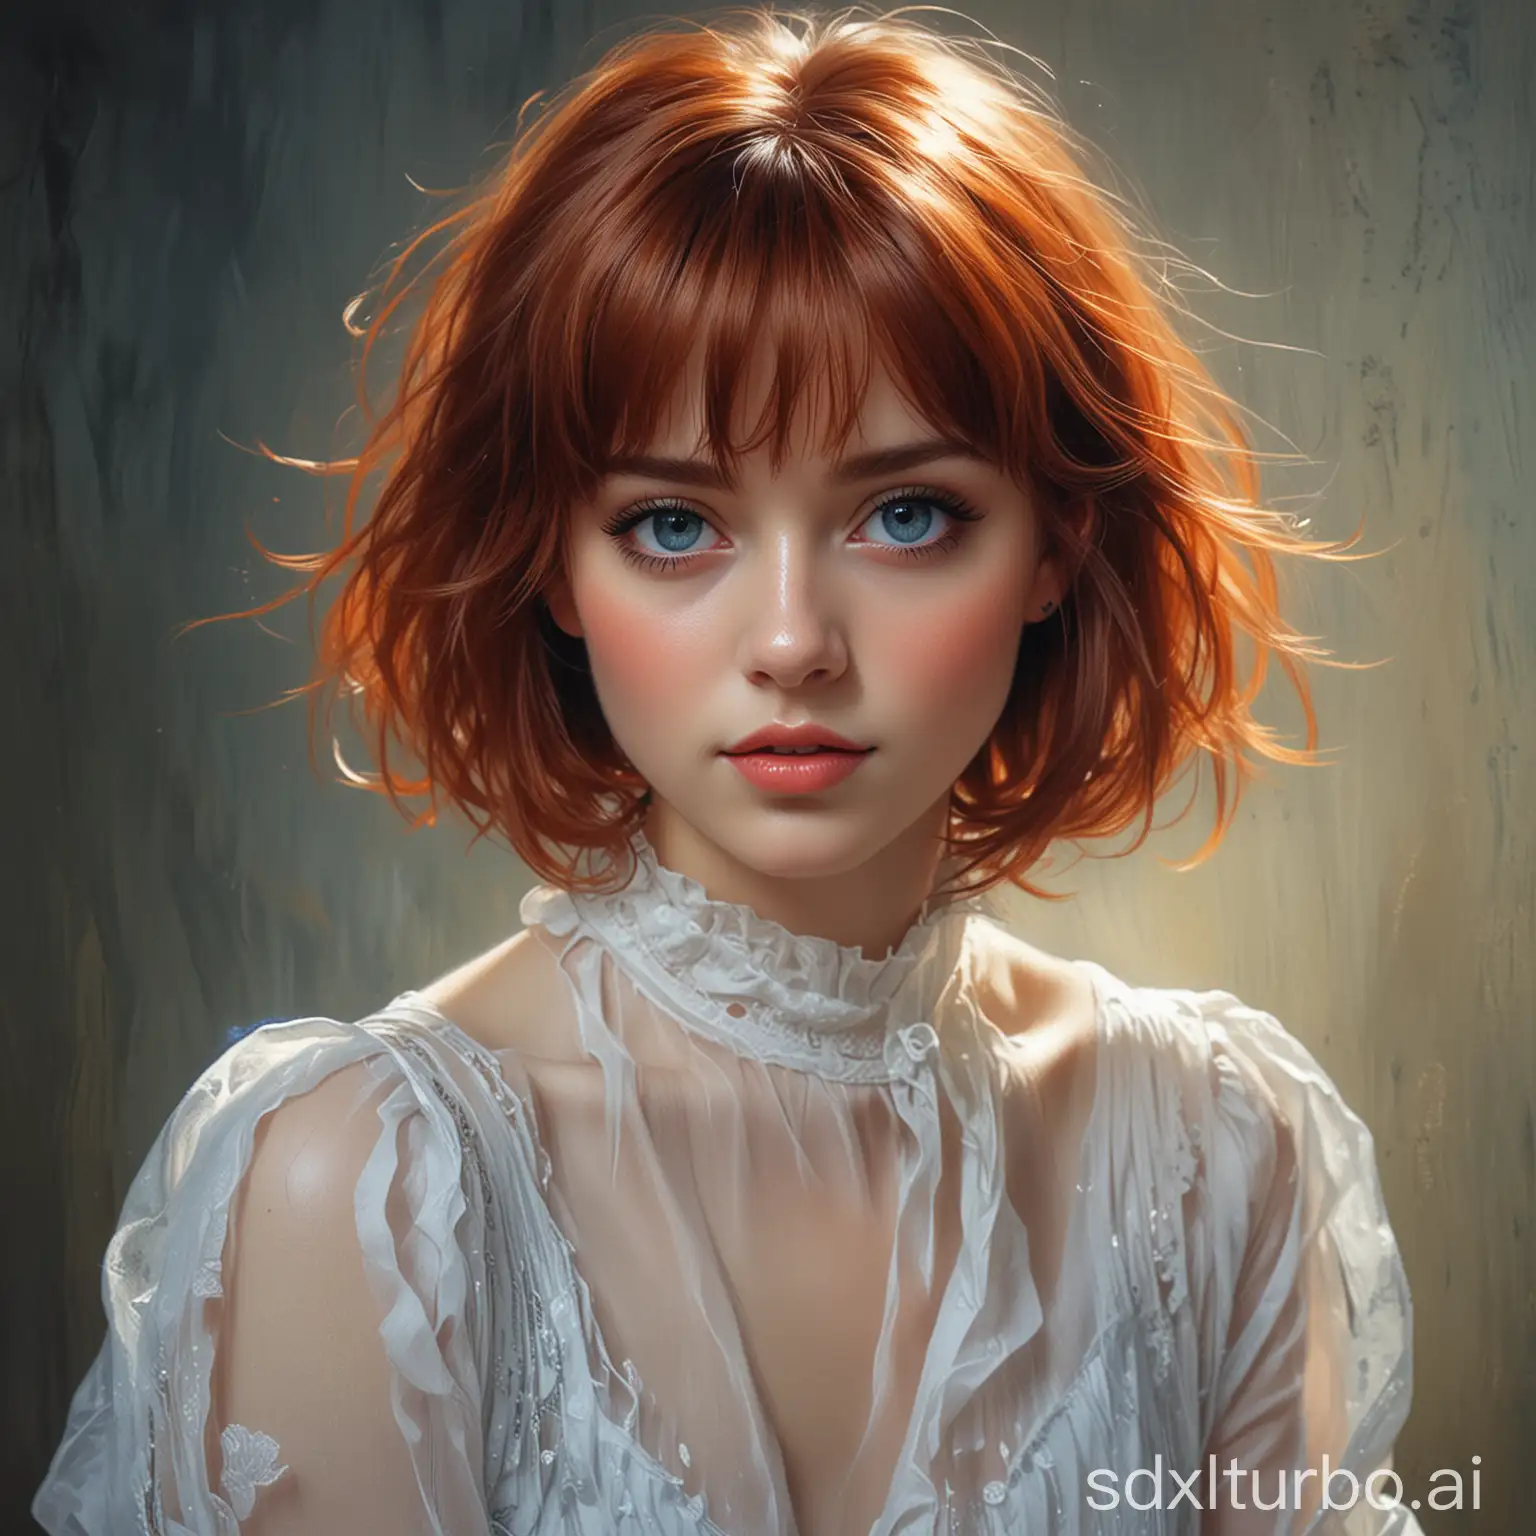 Beautiful girl with large expressive eyes, slight smile, short red hair in bob style, bangs, with long black eyelashes, blue eyes, dressed in a white chiffon black blouse  long sleeve, bangs, with long black eyelashes, blue eyes, dressed in a white chiffon blouse long sleeve, image captured in a soft sketch, style merging the artistic influences of Albert Eckhout, Louis Royo, and Konstantin Razumov, the canvas textured with otherworldly glow simulating luminescent sheen, glow effect, soft, intricate pose